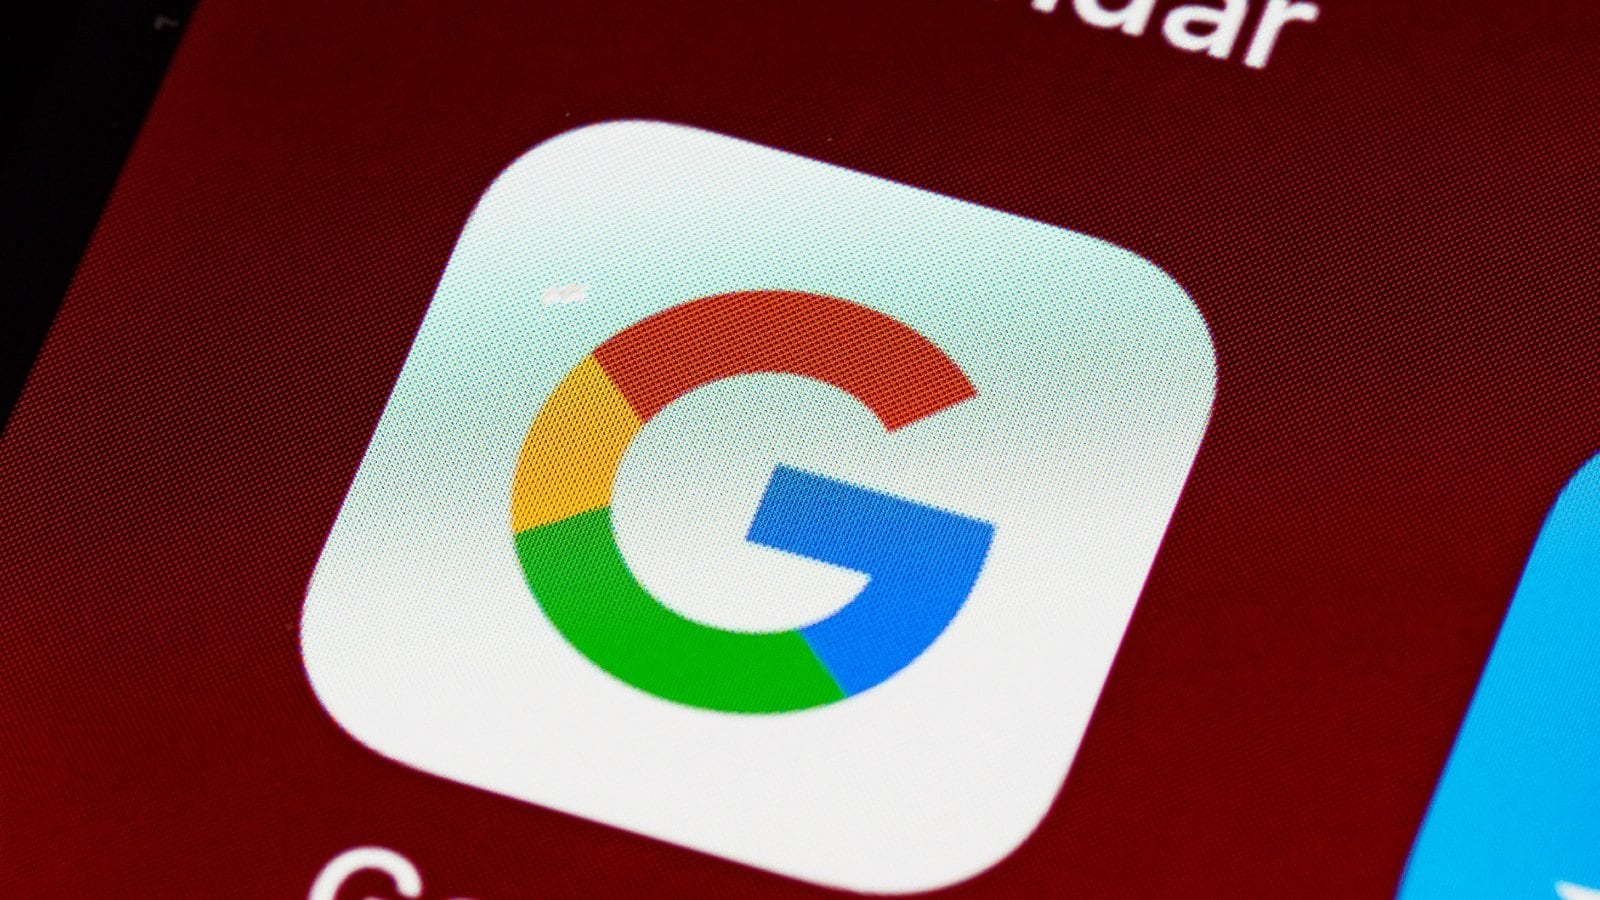 Google Search Will Soon Offer Blurred Explicit Images By Default